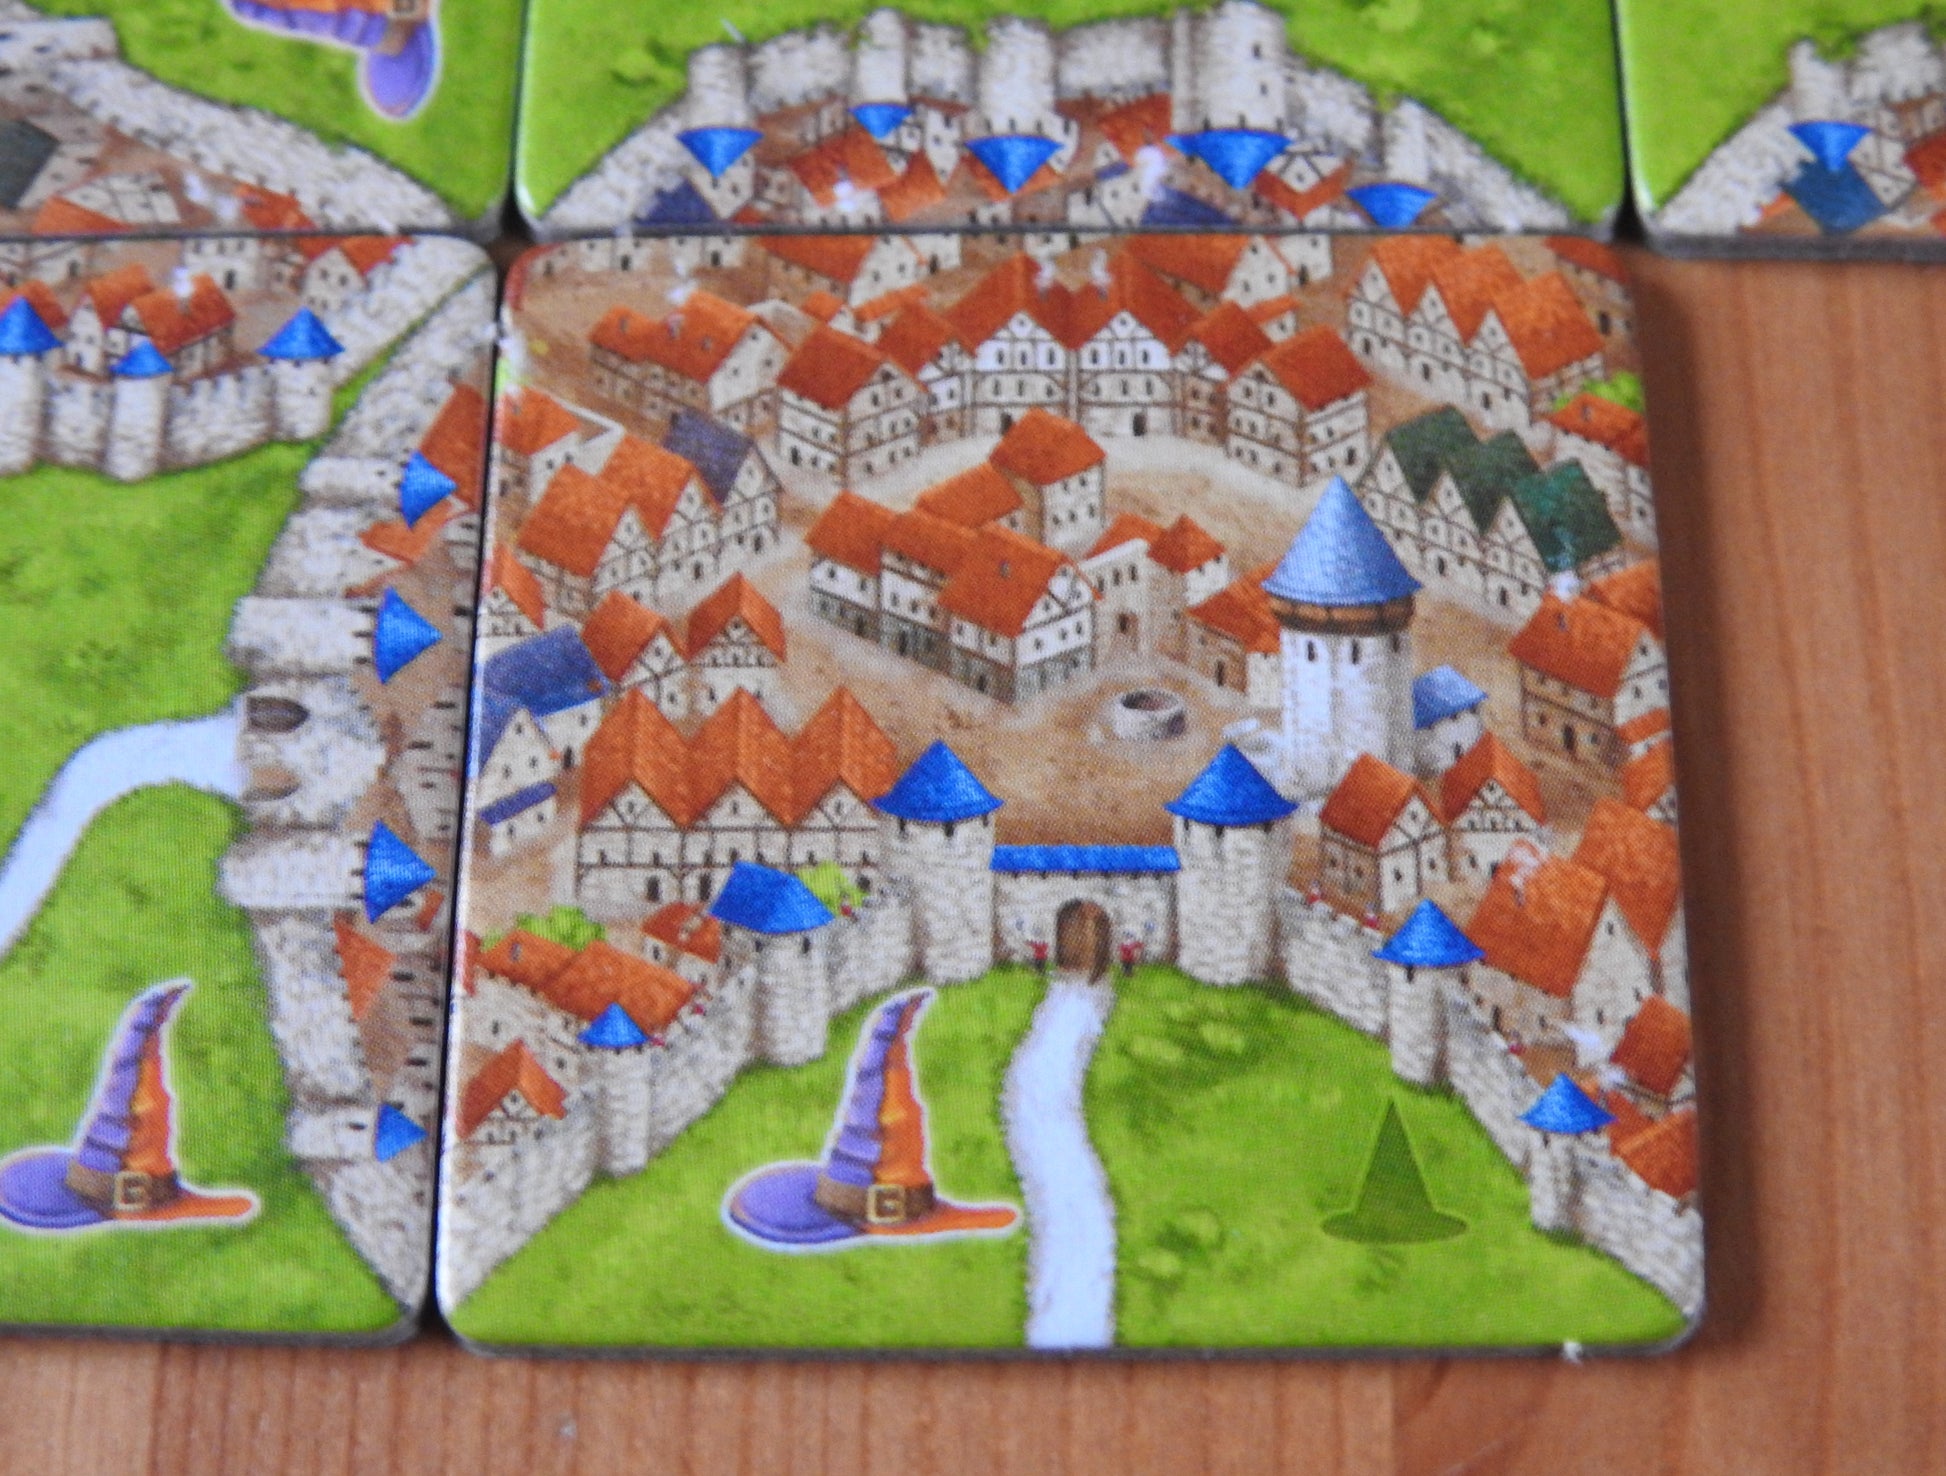 Close-up of one of the special landscape tiles showing a city in this Carcassonne Mage & Witch expansion.